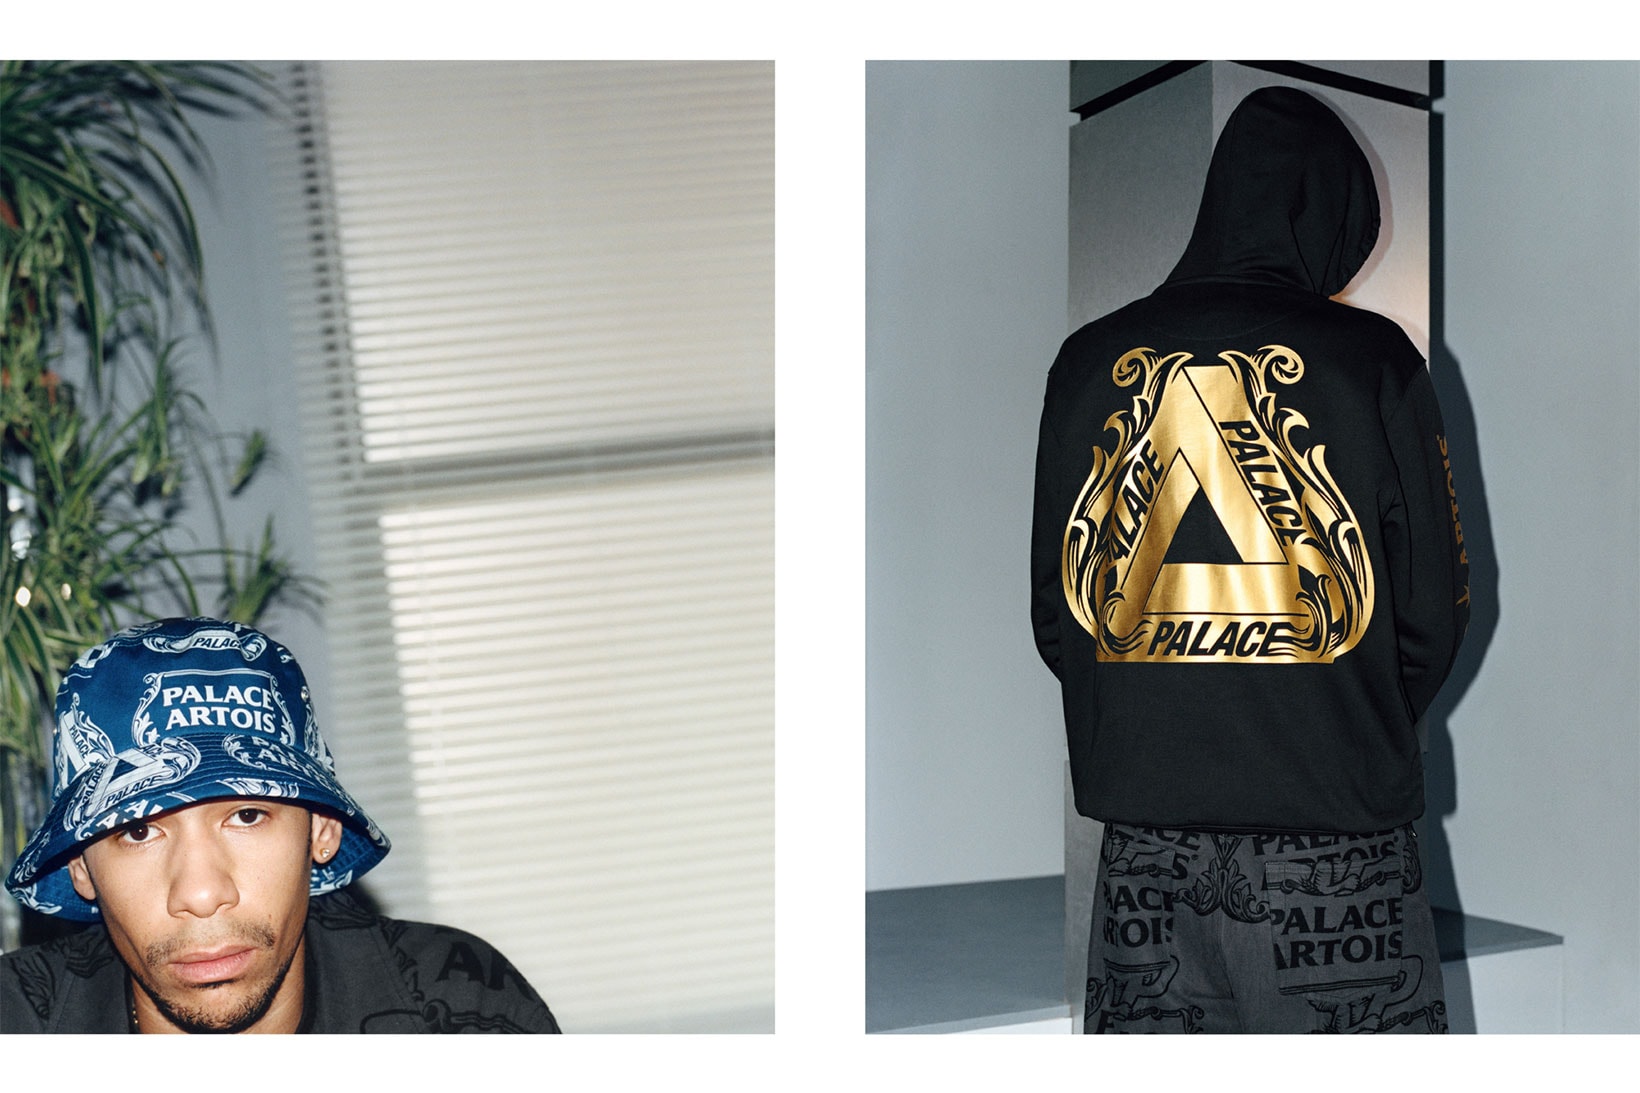 palace skateboards stella artois beer collaboration collection bucket hat hoodie